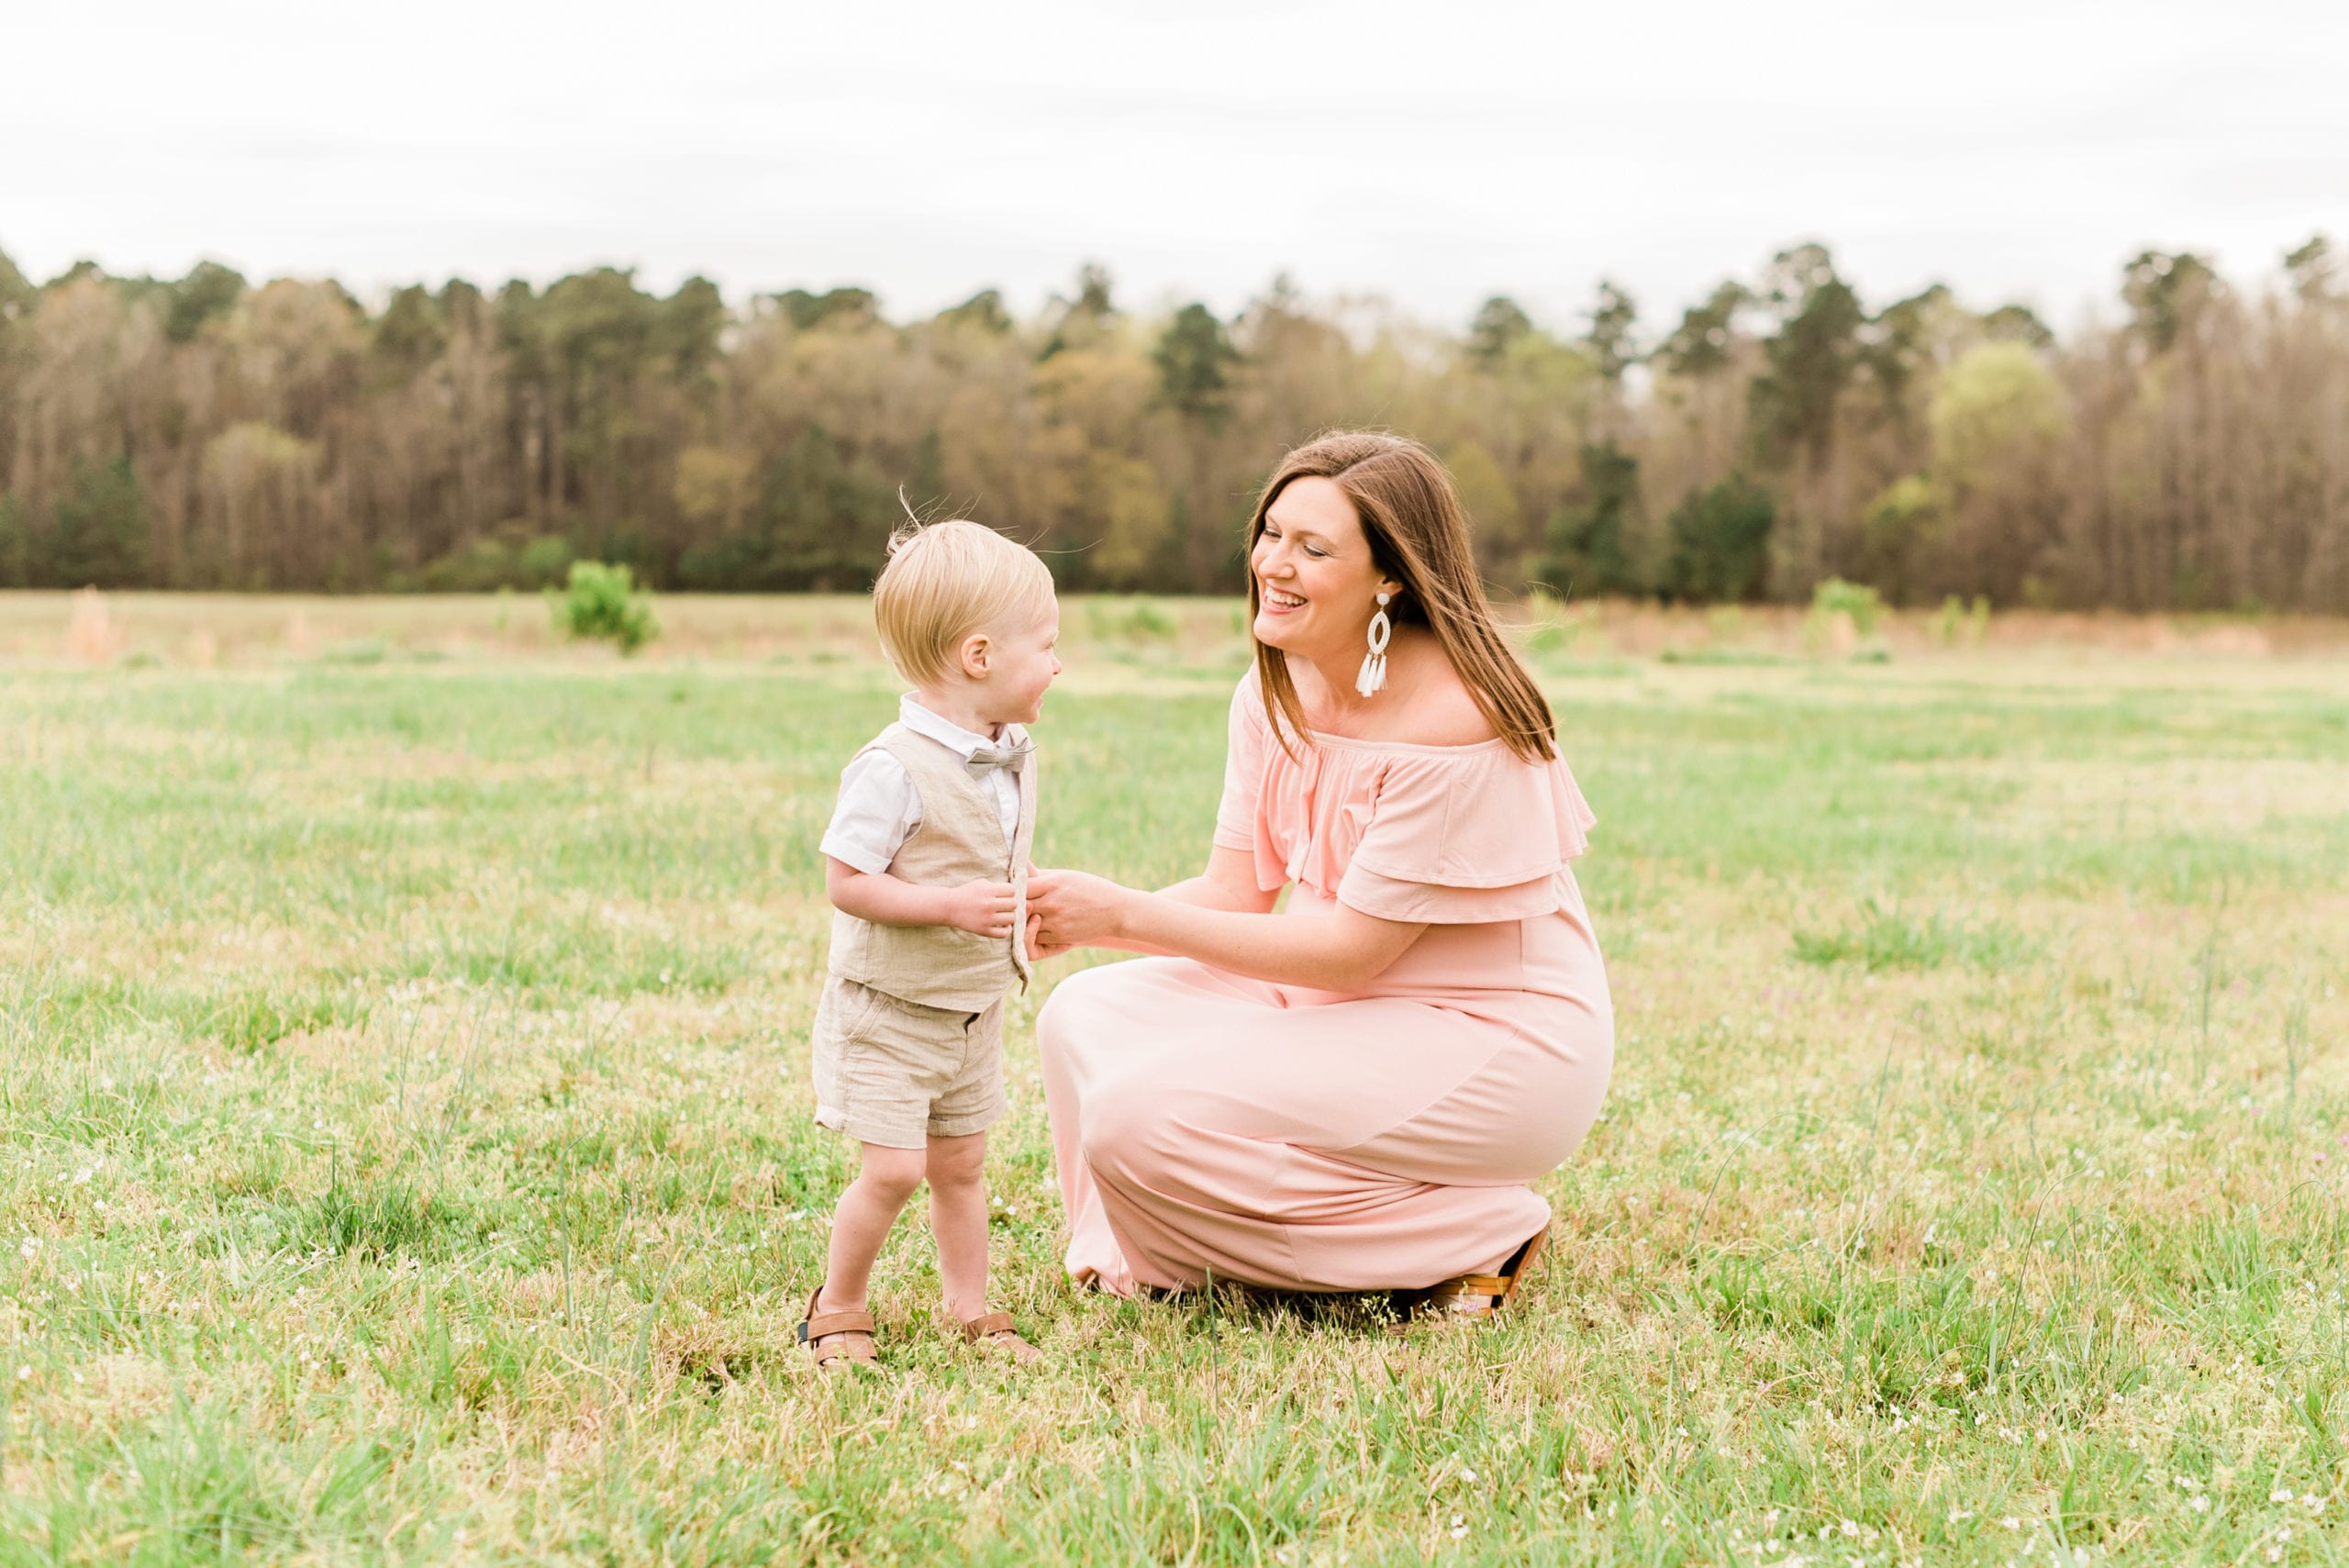 wake forest pregnant mother bending down to playing with her toddler son who is wearing a tan vest and bowtie photo